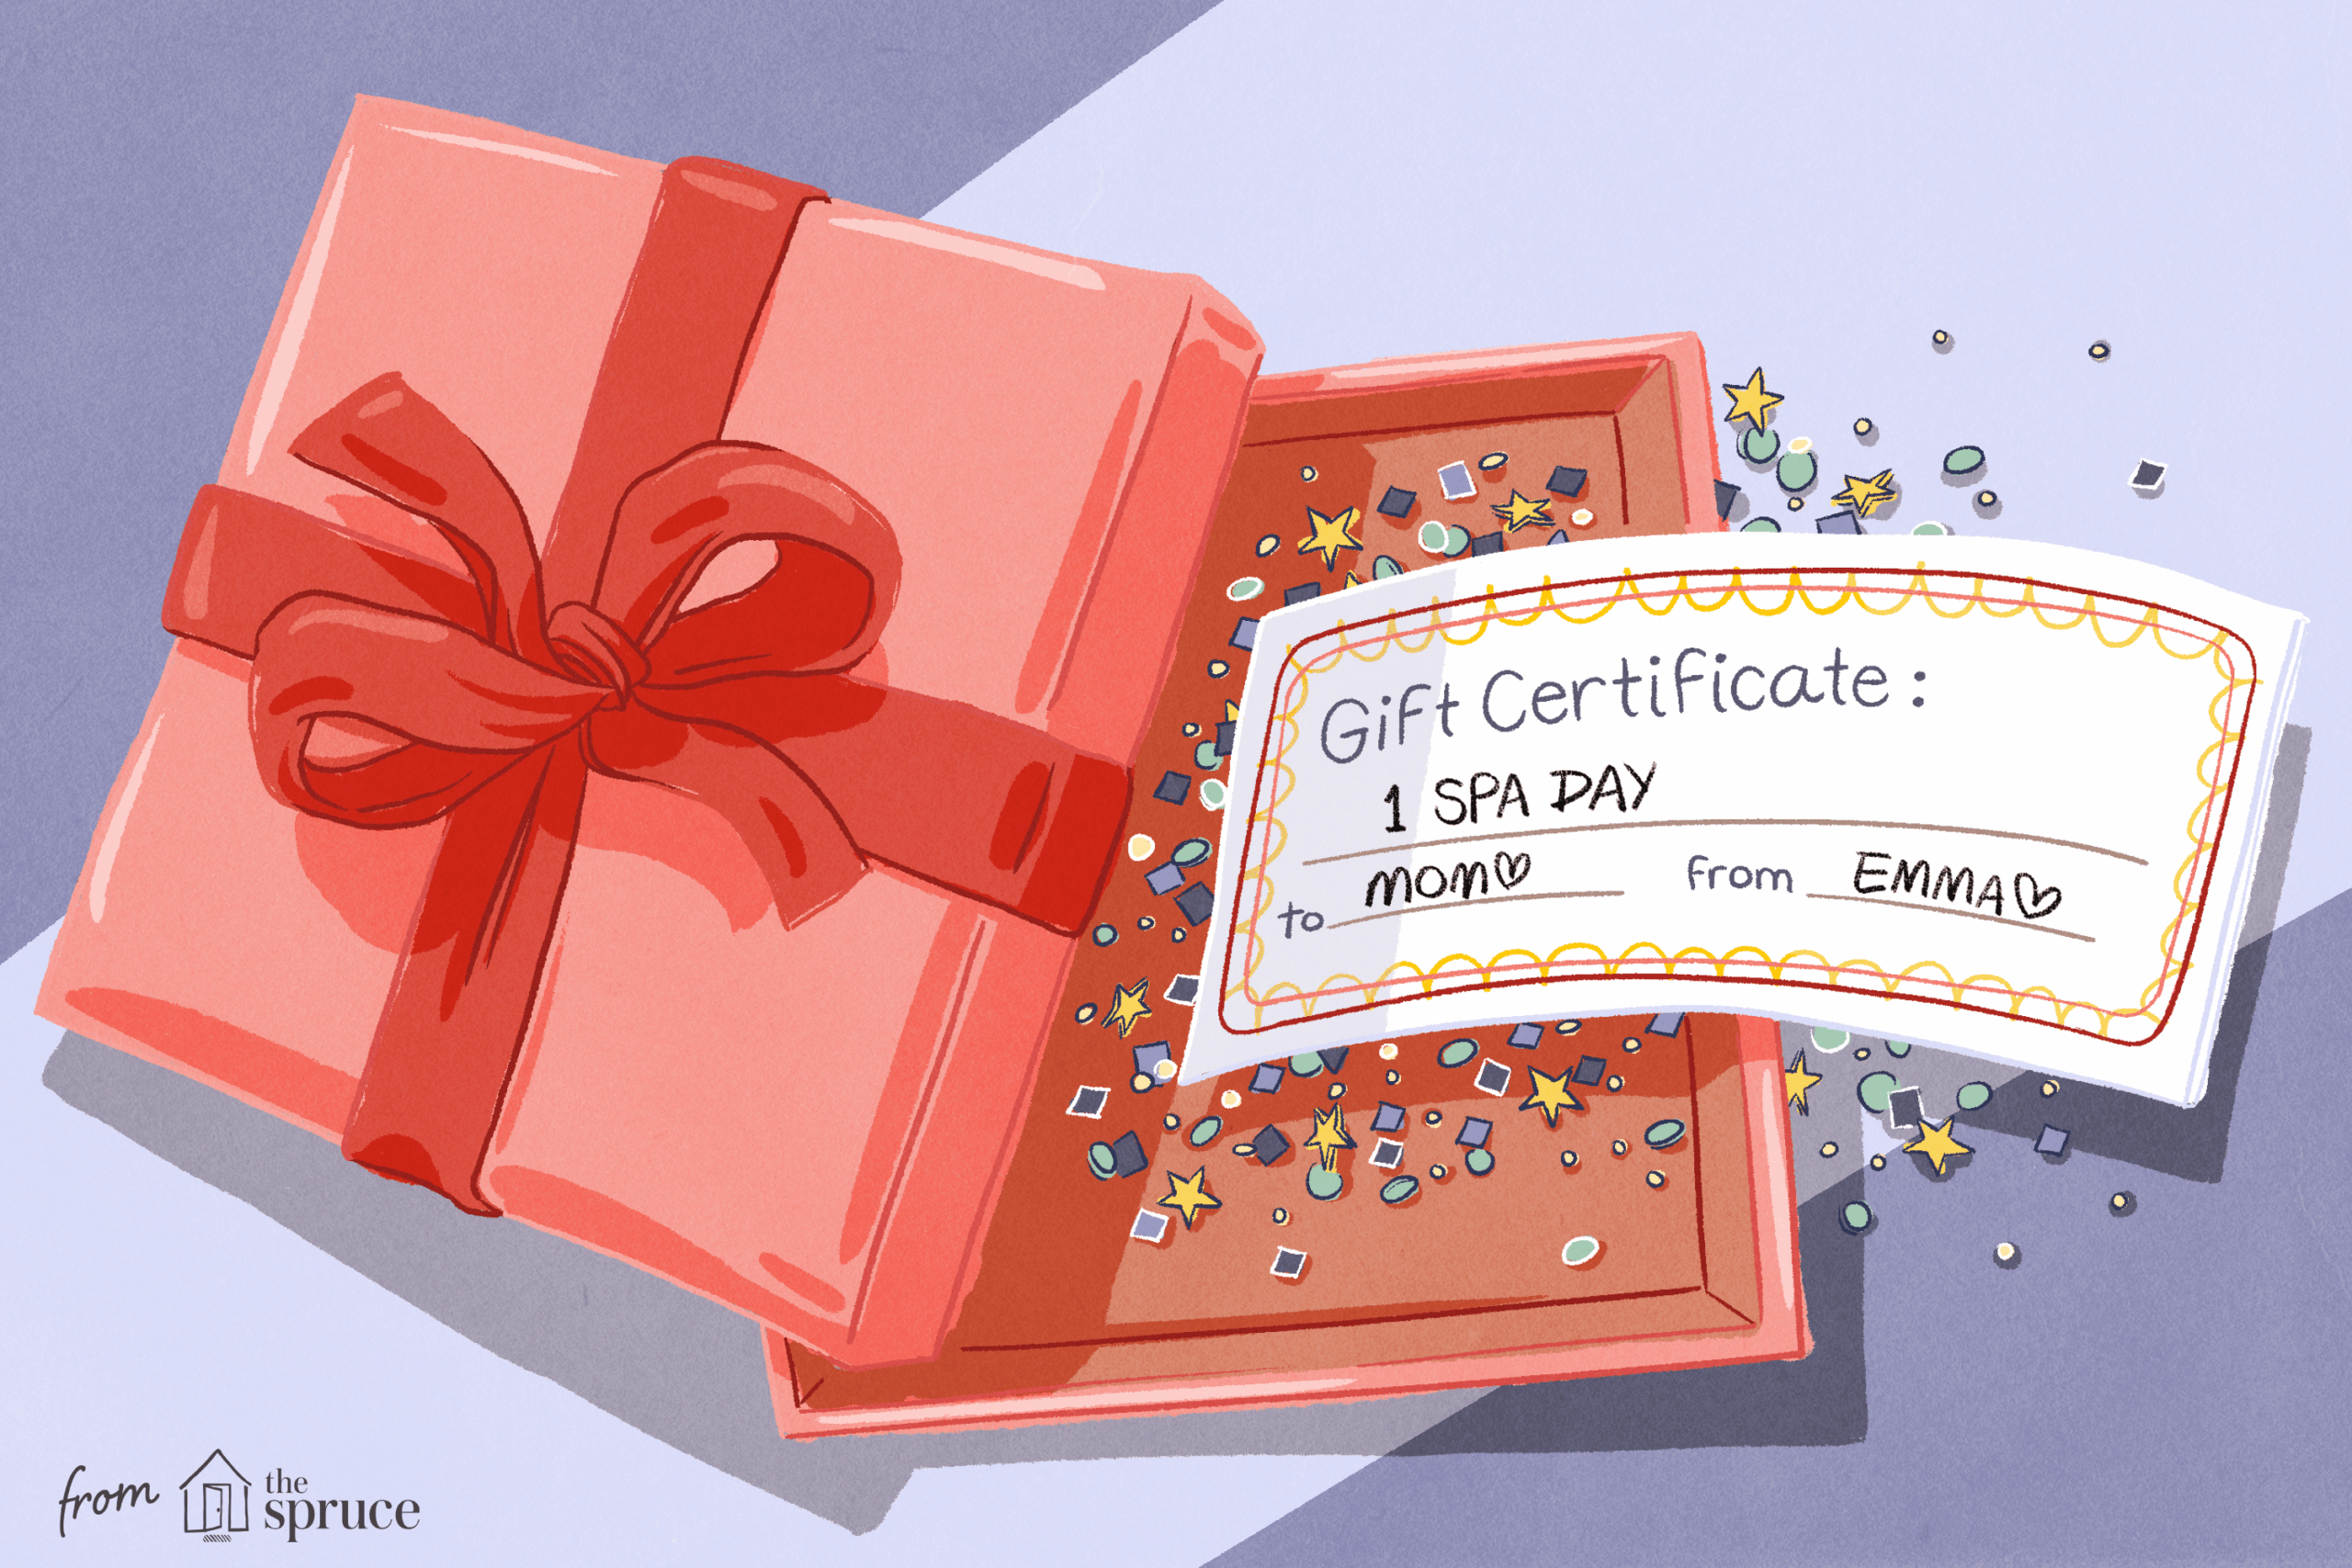 Free Gift Certificate Templates You Can Customize For Spa Day Gift Certificate Template